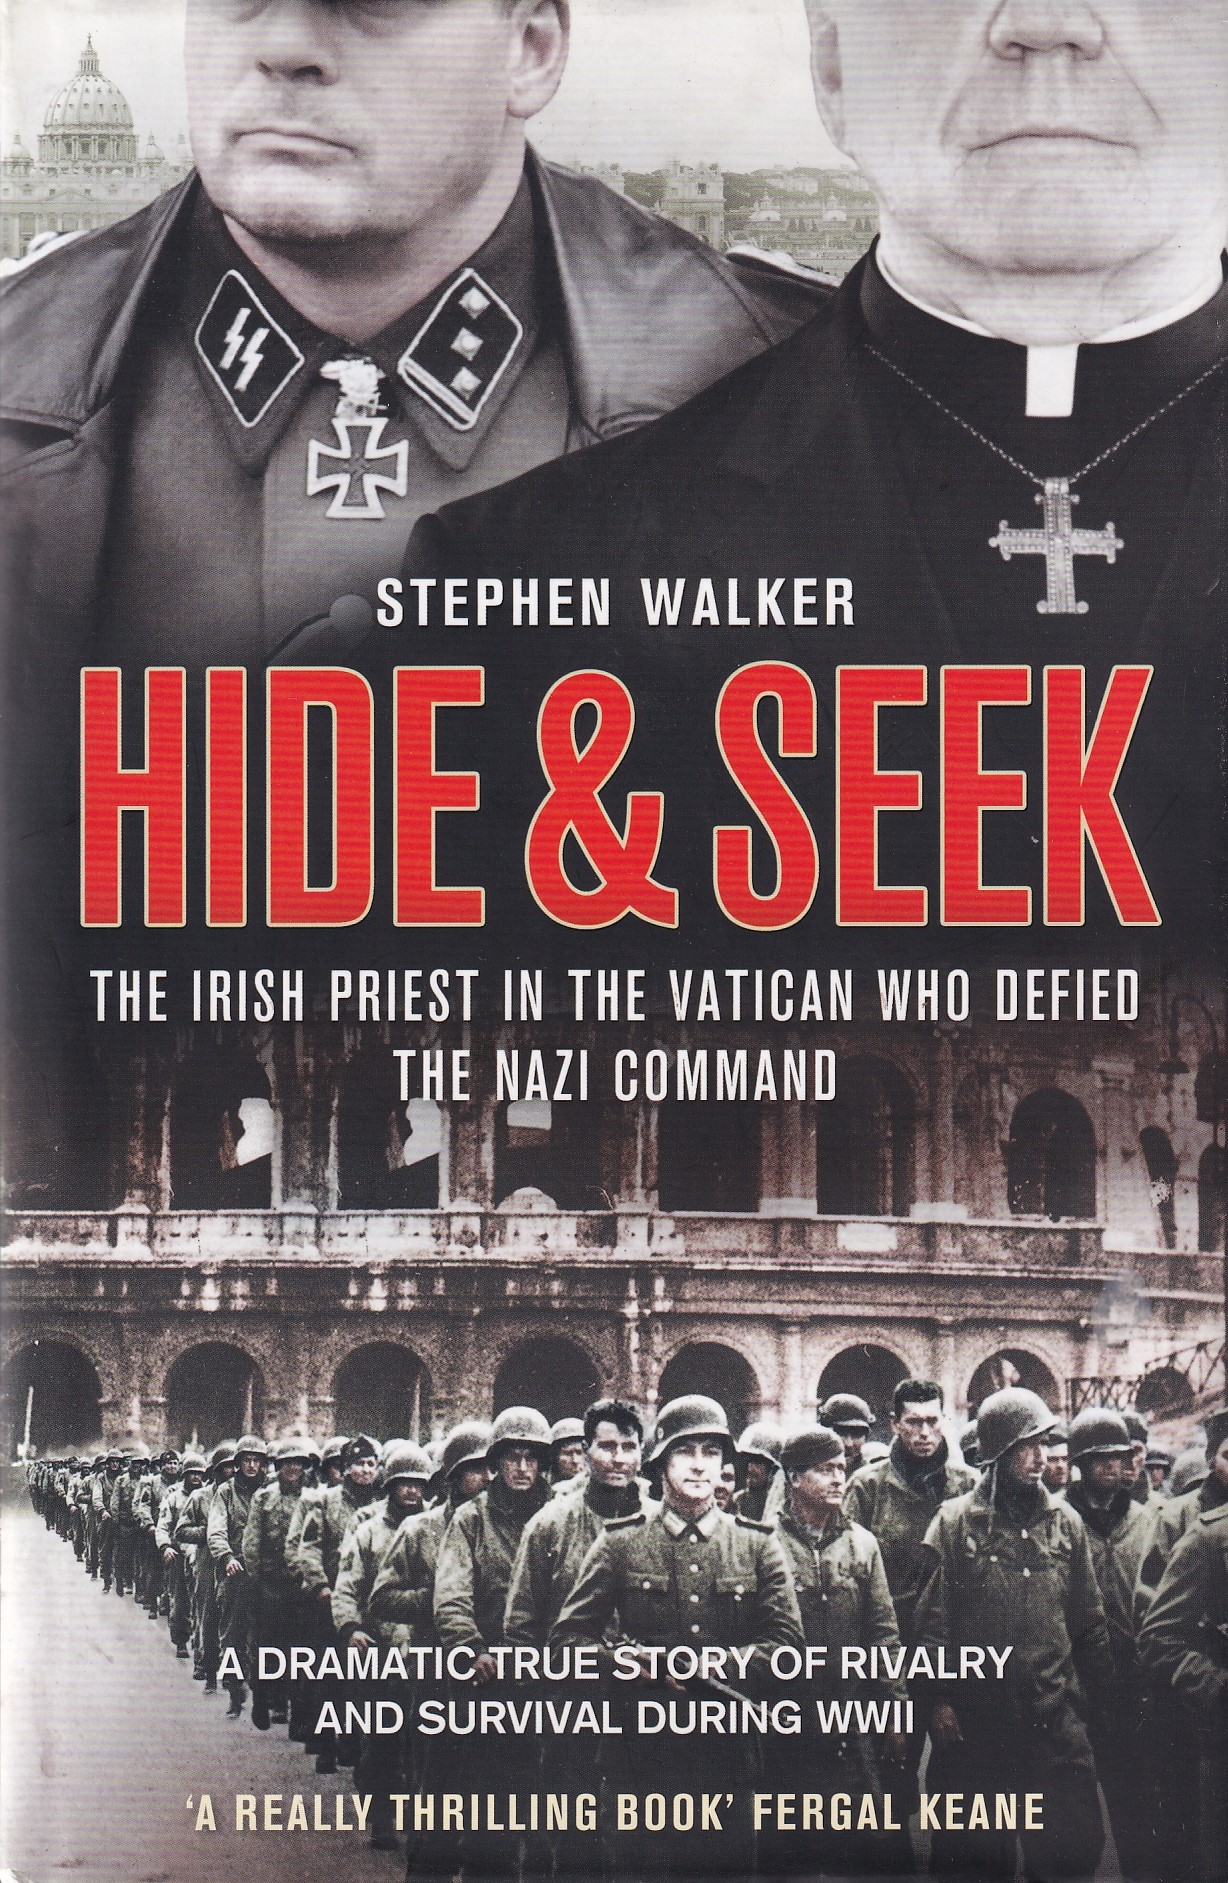 Hide and Seek: The Irish Priest in the Vatican who Defied the Nazi Command. The dramatic true story of rivalry and survival during WWII by Stephen Walker